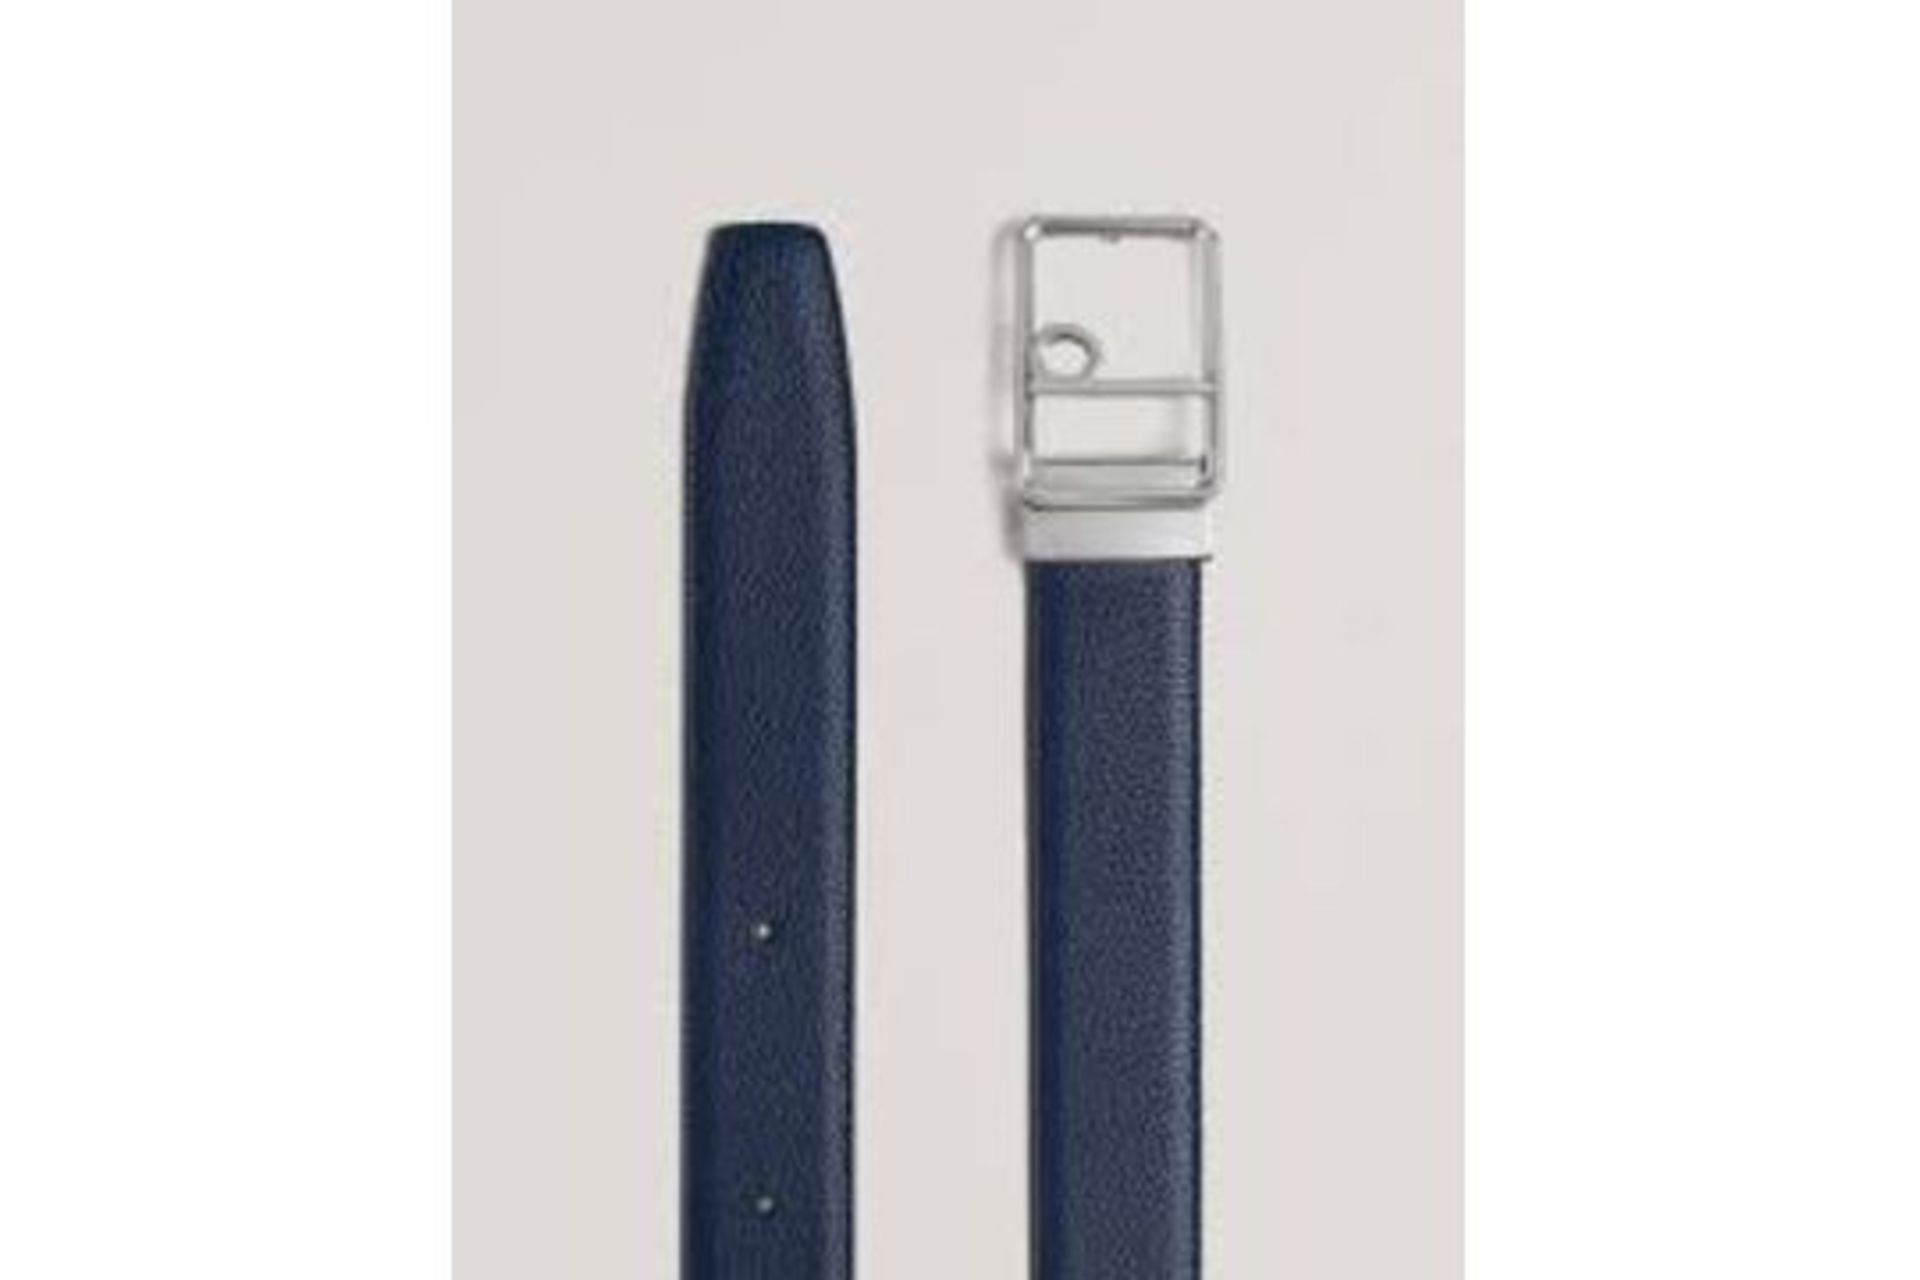 BRAND NEW ALFRED DUNHILL 35Mm Tg Spoiler Pdp Ca, NAVY, 42 (708) RRP £280 - 8